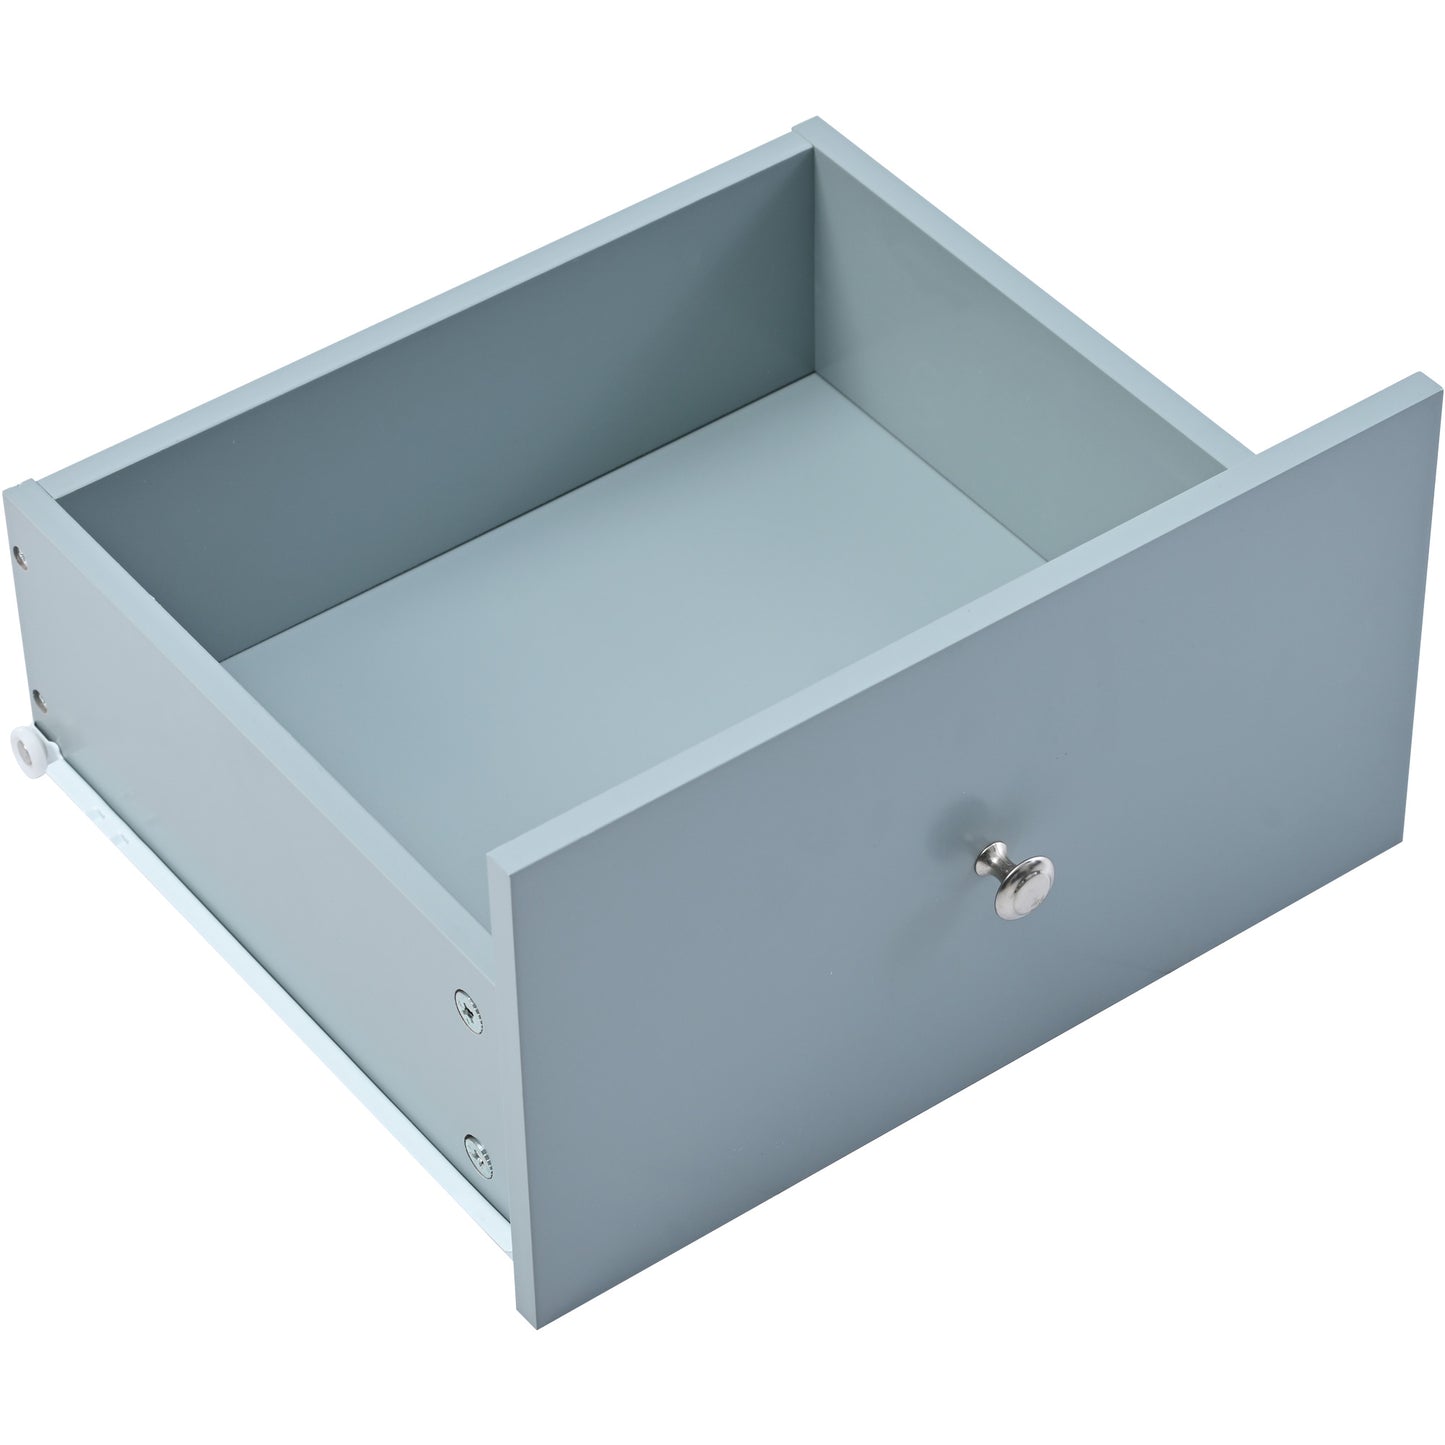 Store Kitchen Cart on 4 Wheels with 2 Drawers and 3 Open Shelves,Grey Blue